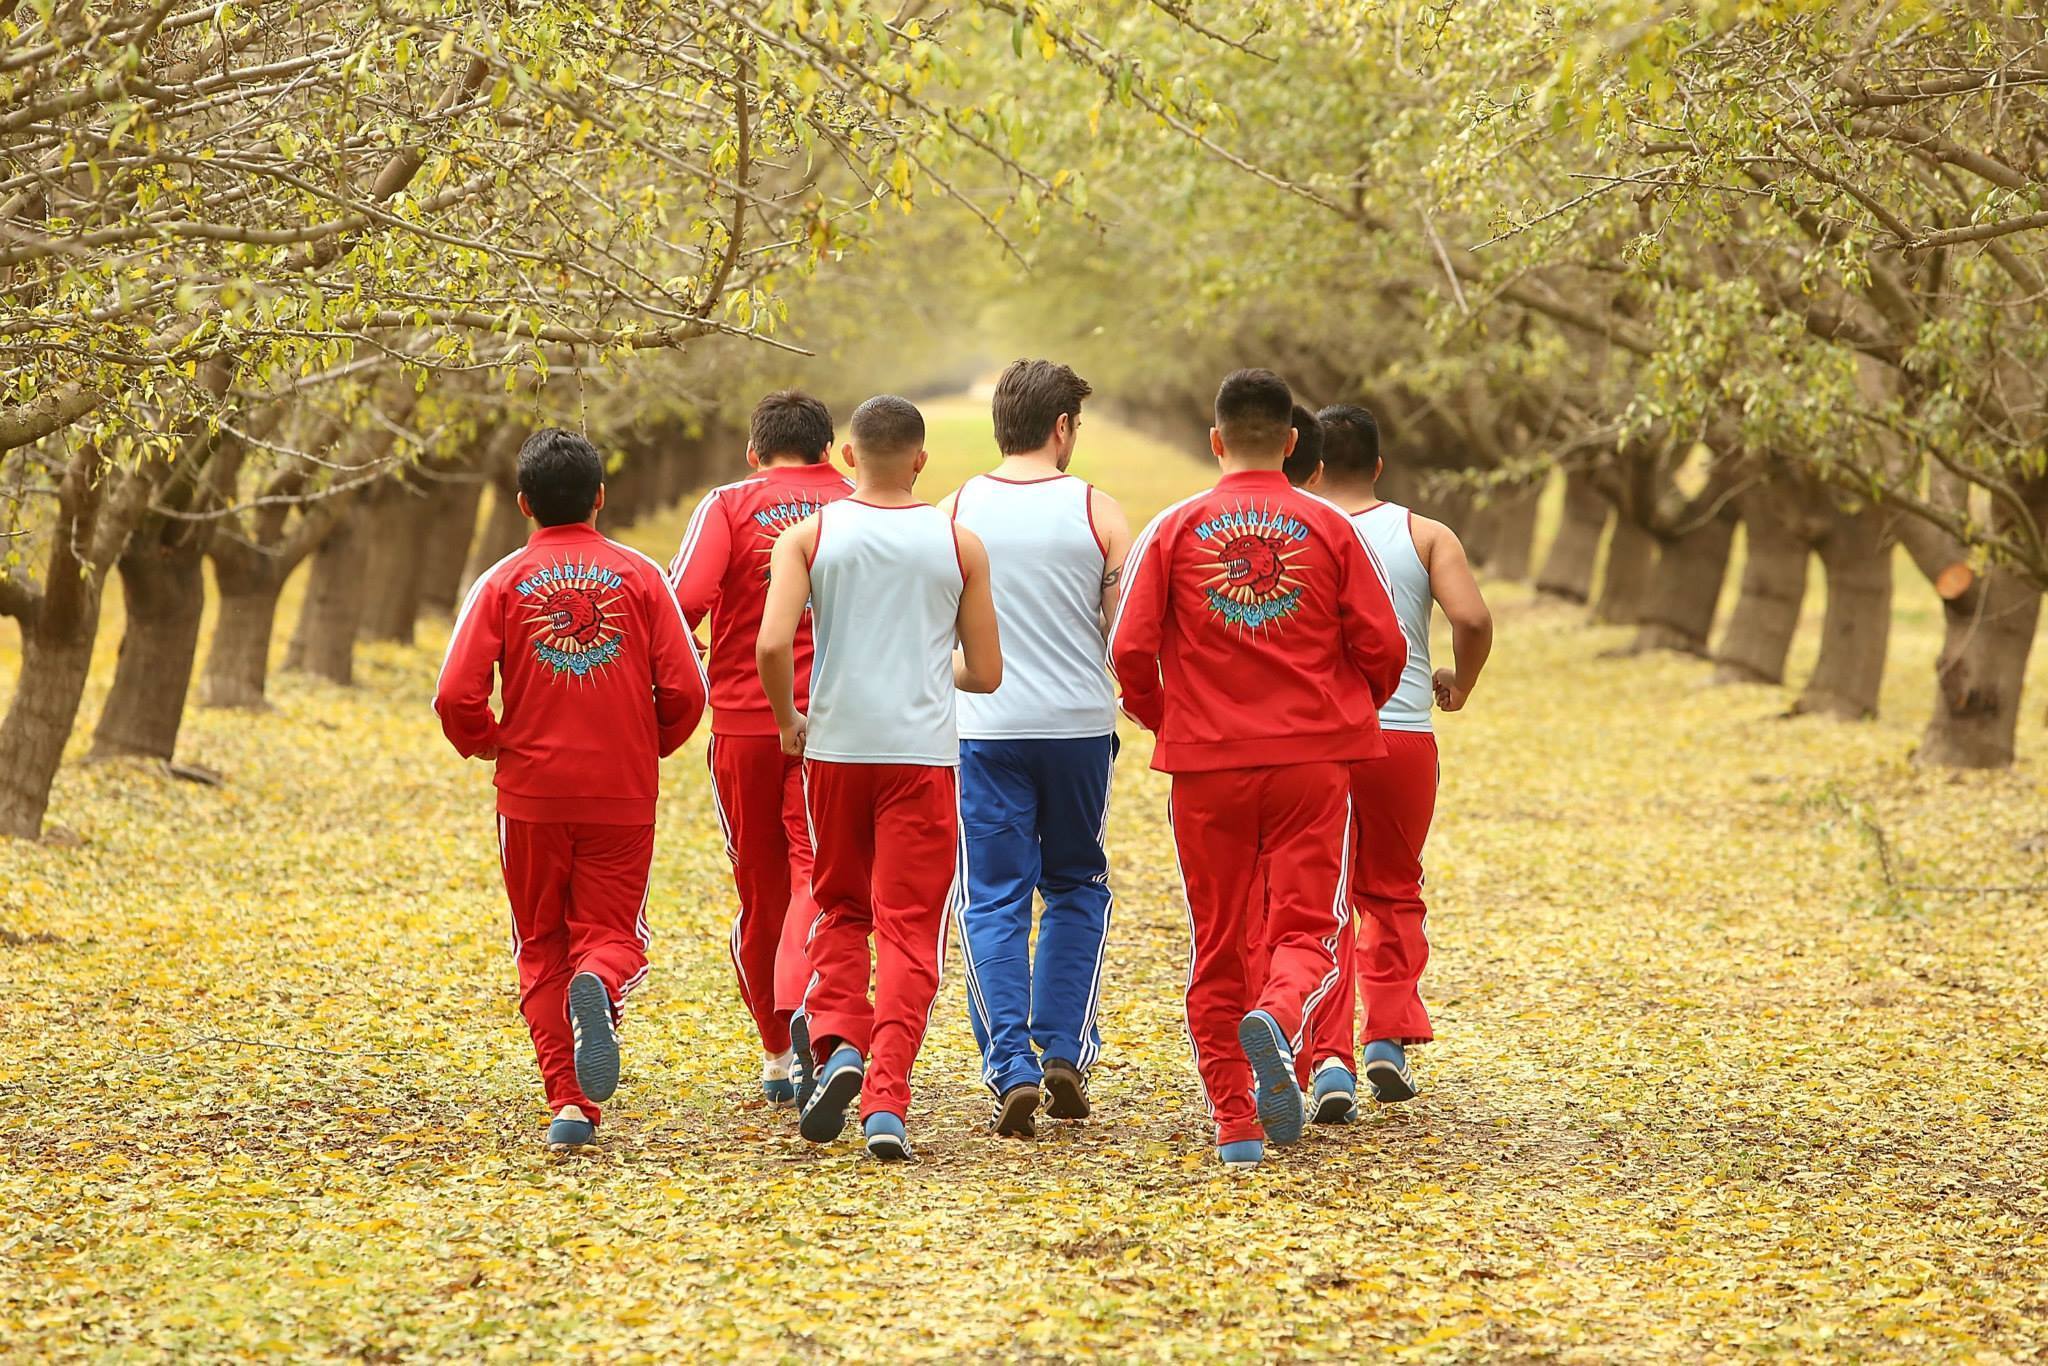 Group of teenagers walking in a field from the movie "McFarland, USA"